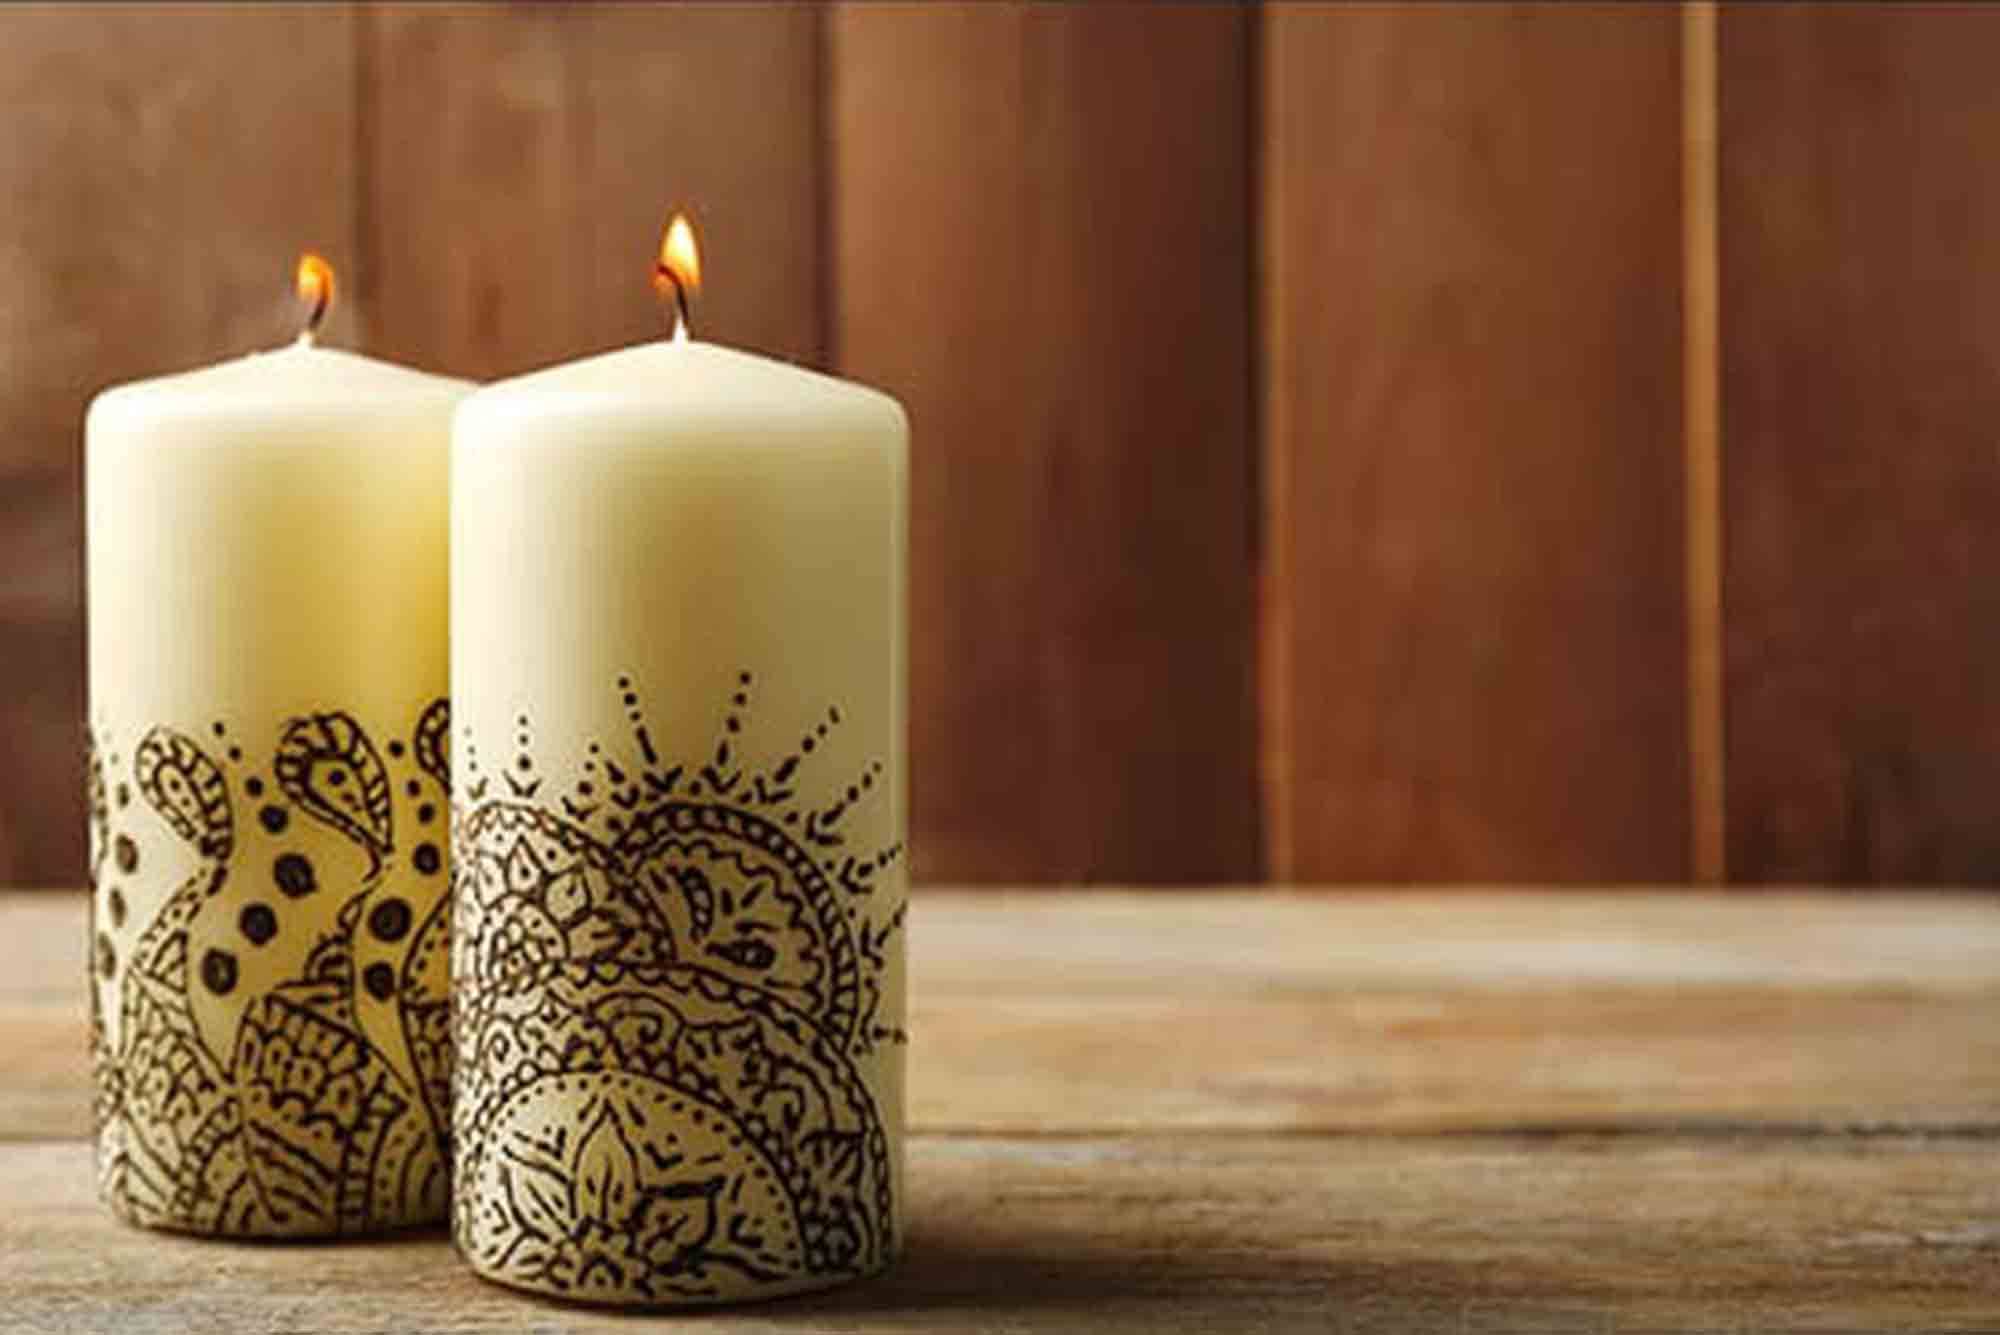 Henna looks beautiful on white candles.